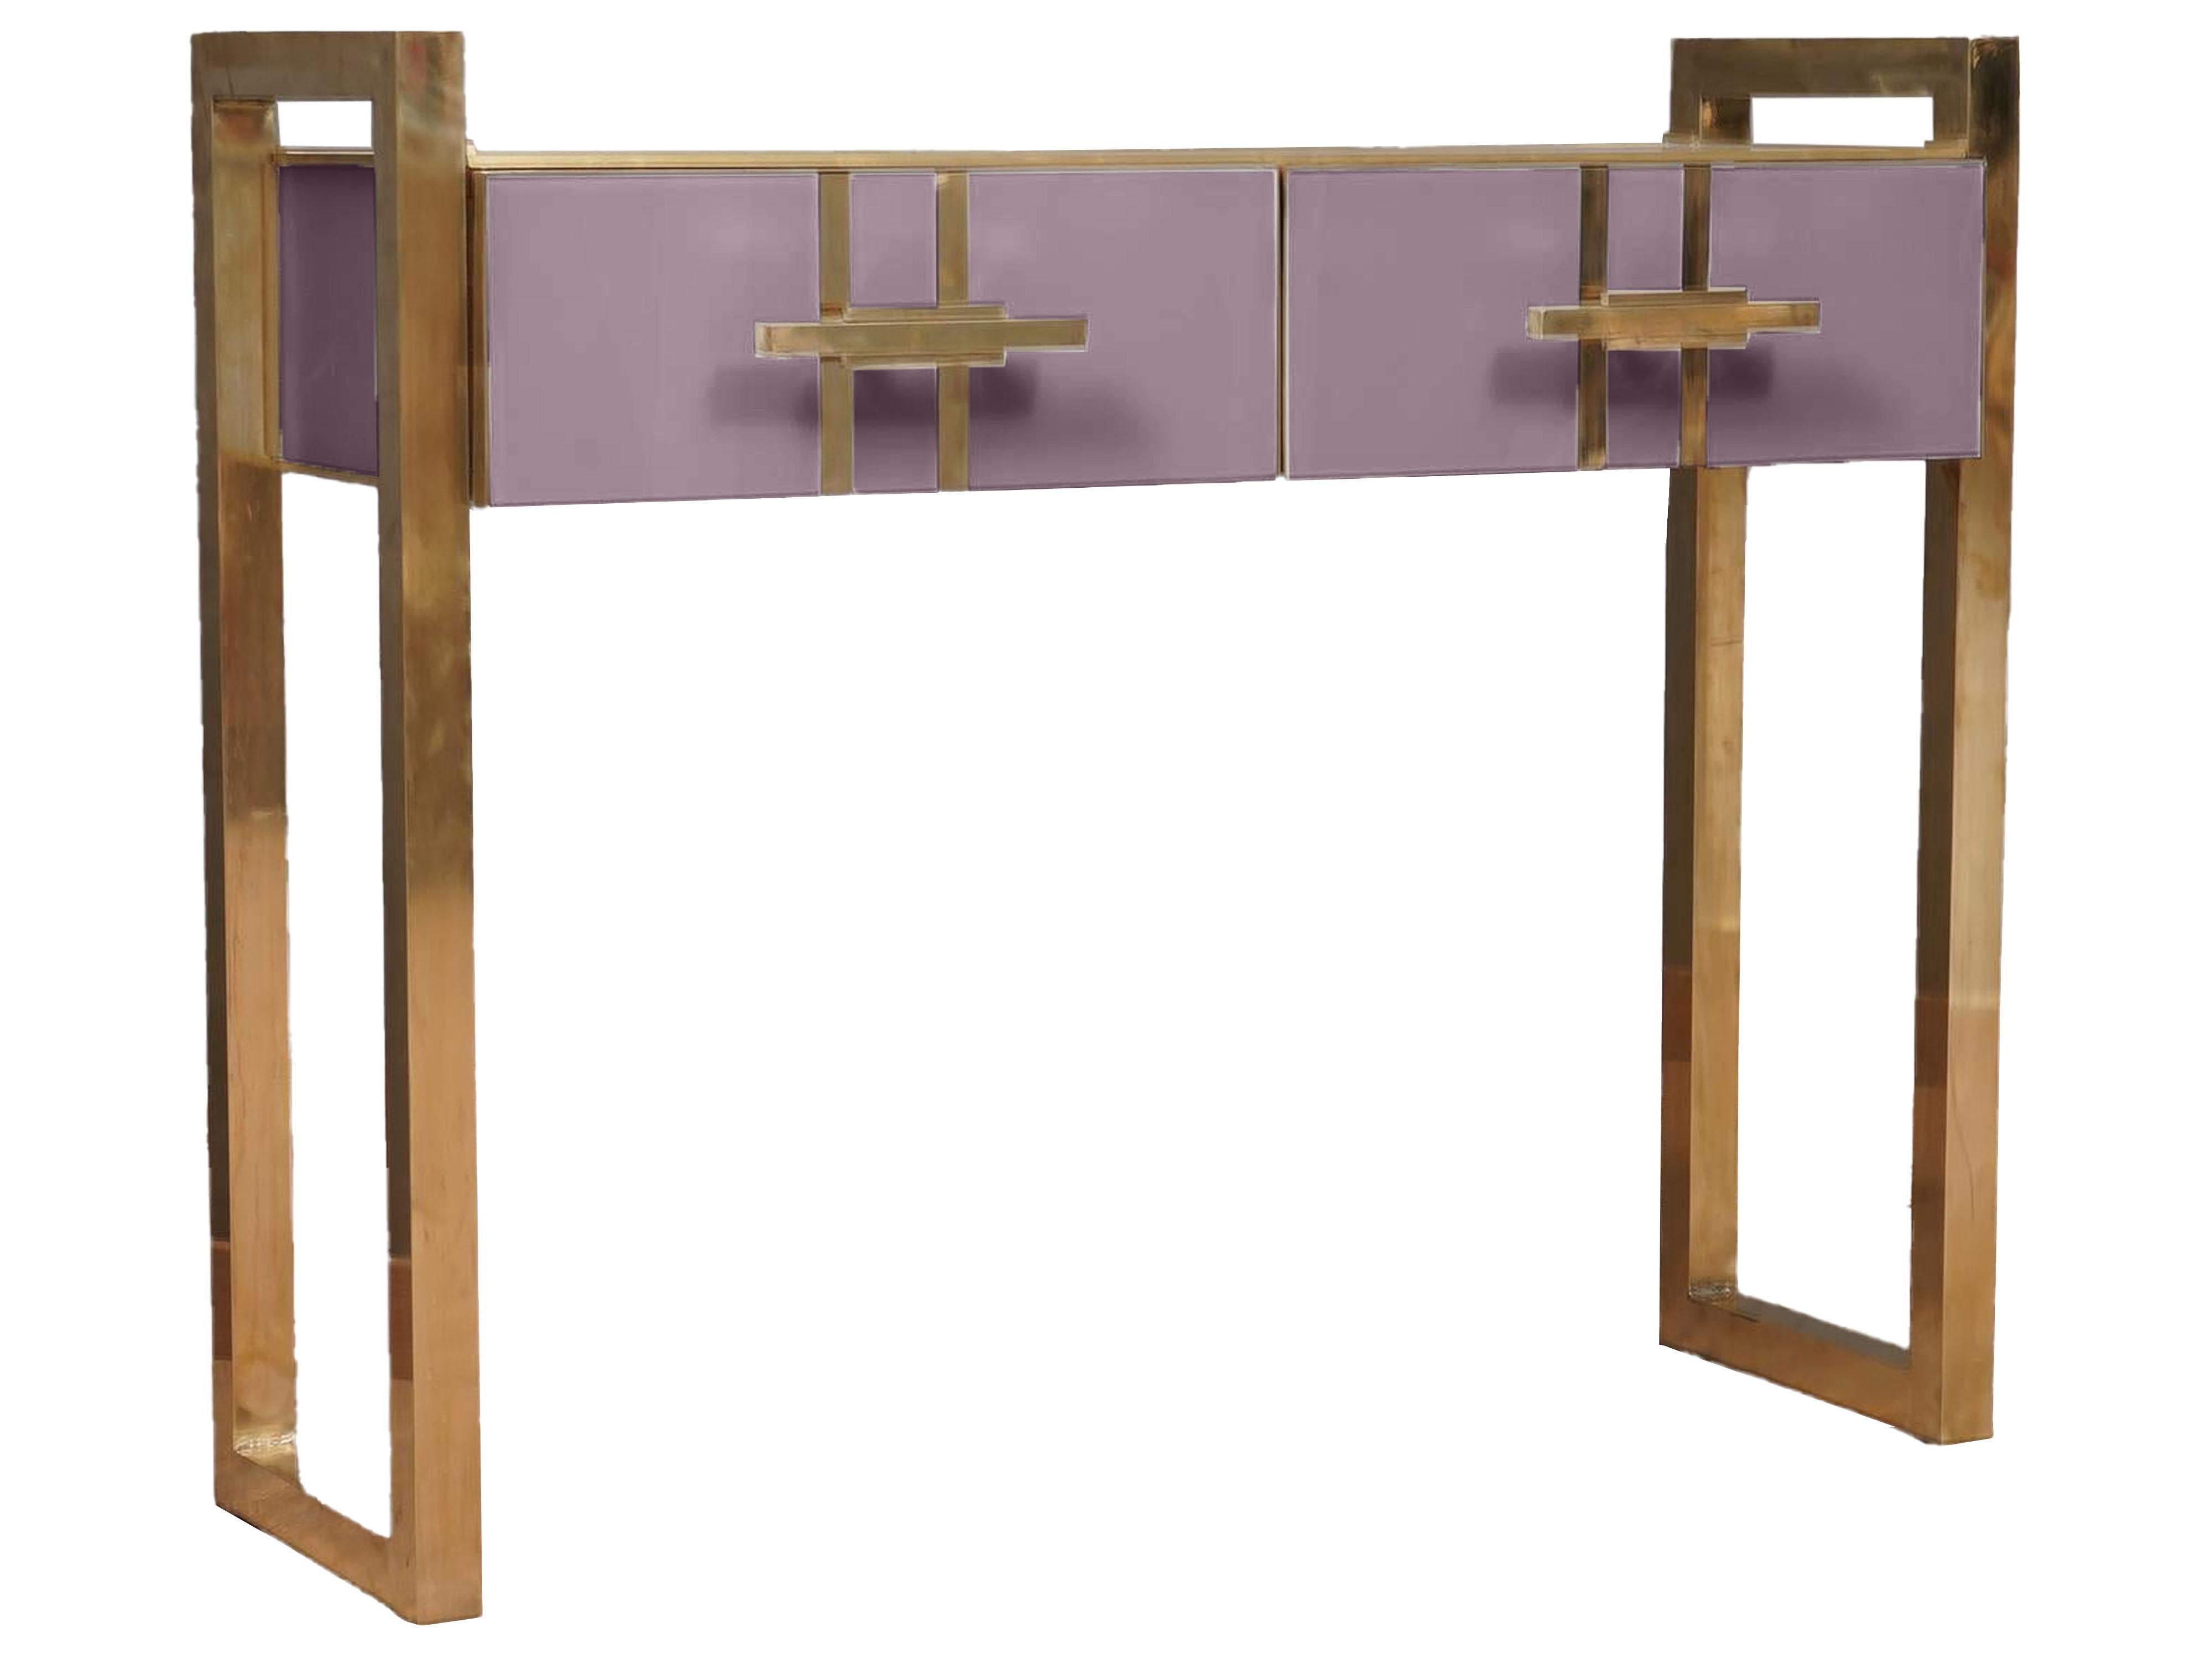 Mid Century Modern desk in pastel purple, a Murano glass masterpiece available exclusively at auction. 

This unique and one-of-a-kind desk was handcrafted by skilled artisans and showcases the unparalleled beauty of birch wood and iconic Murano